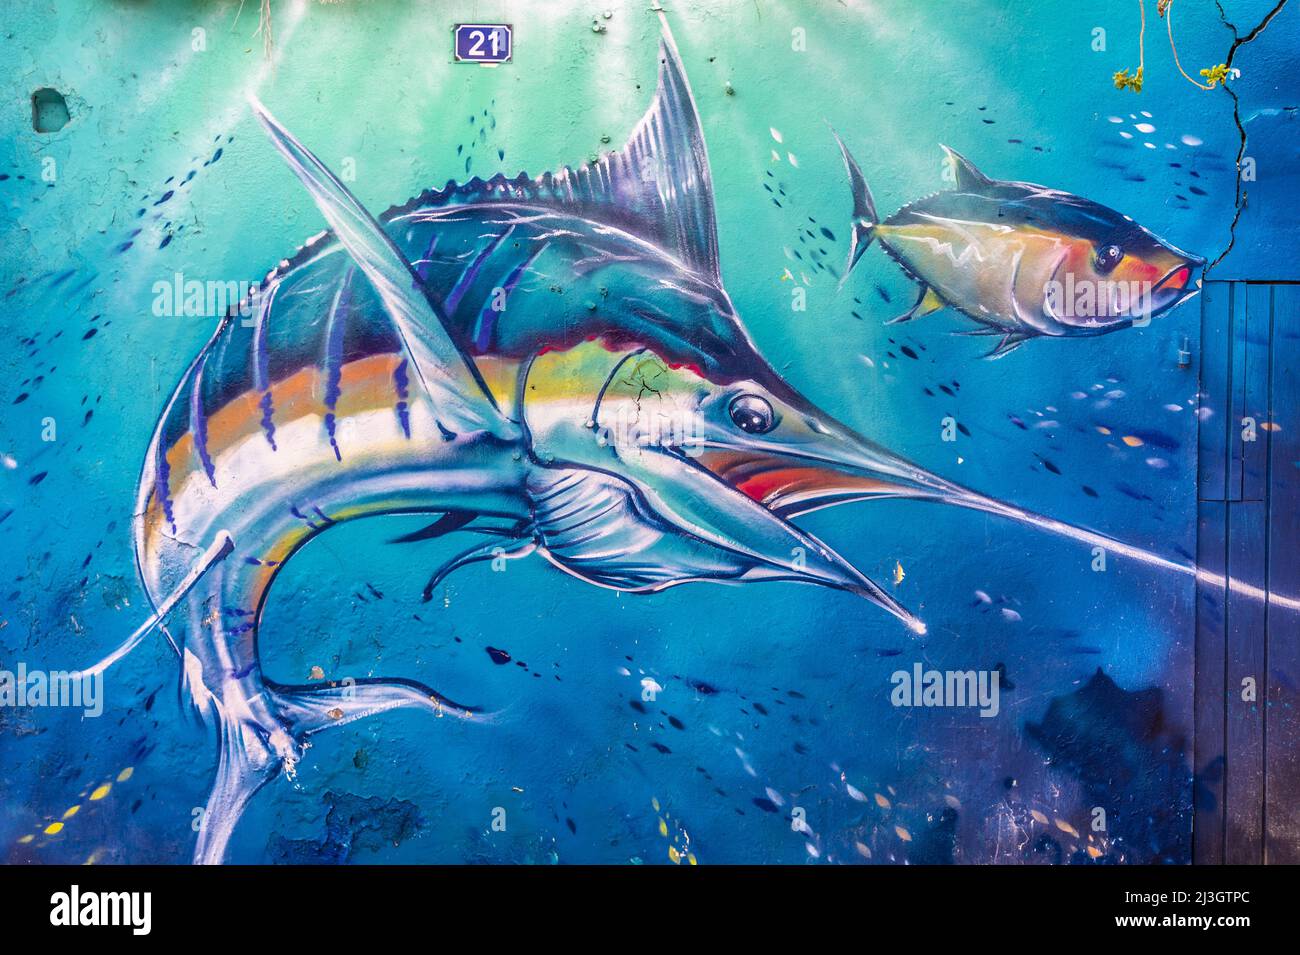 France, Lesser Antilles, French West Indies, Saint-Martin, Marigot, Marlin hunting in an underwater landscape, work by Indo-Guadeloupean street artist Jimmy SHEIKBOUDHOU Stock Photo